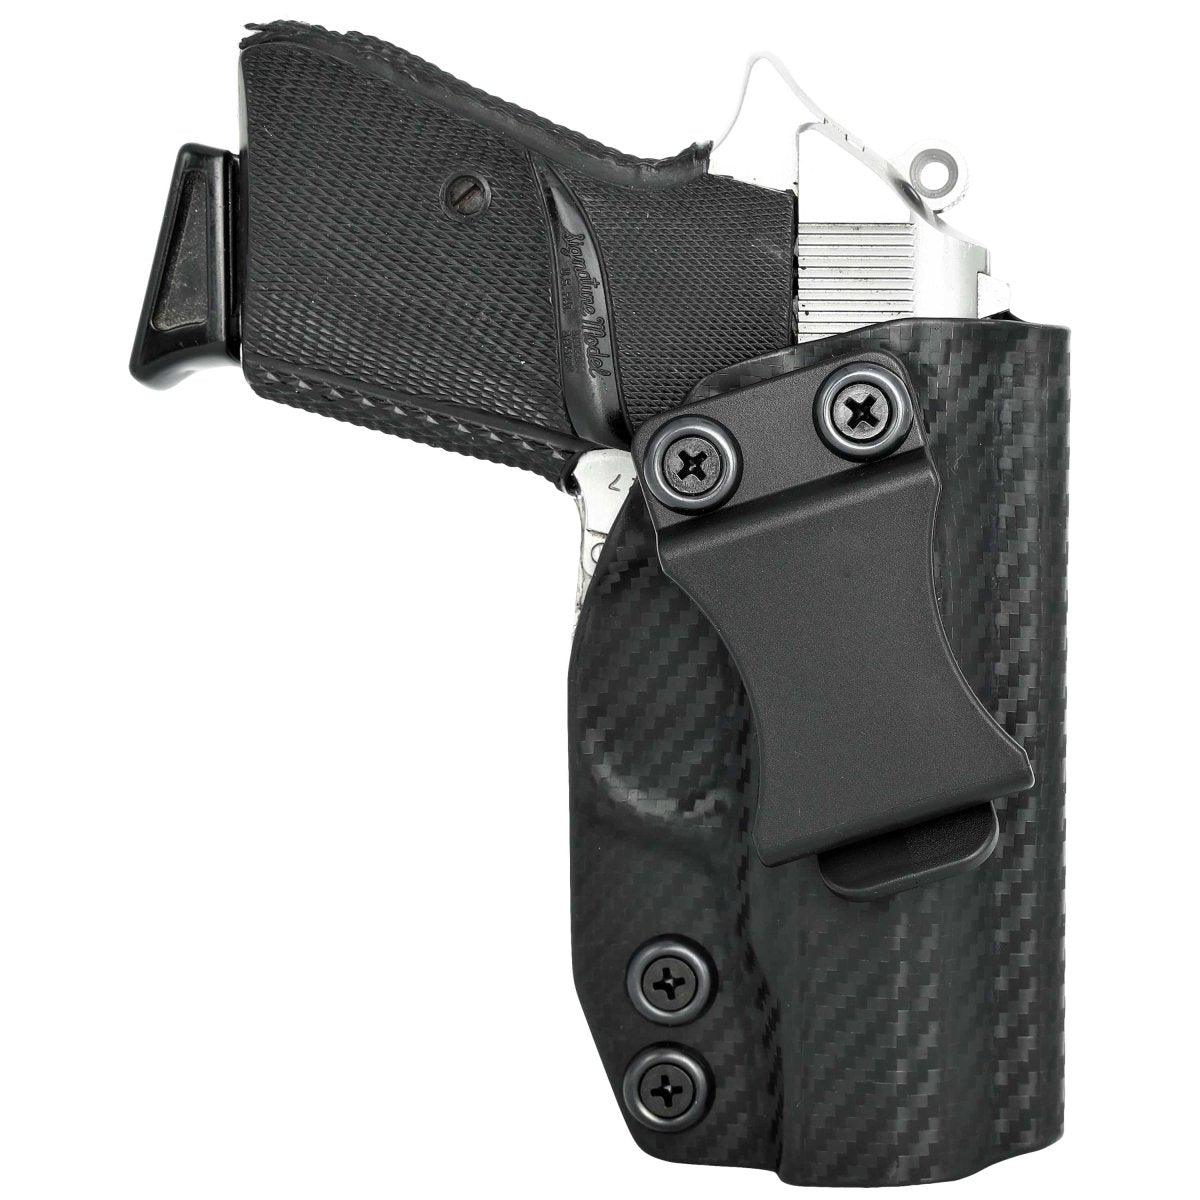 WALTHER PPK HOLSTERS